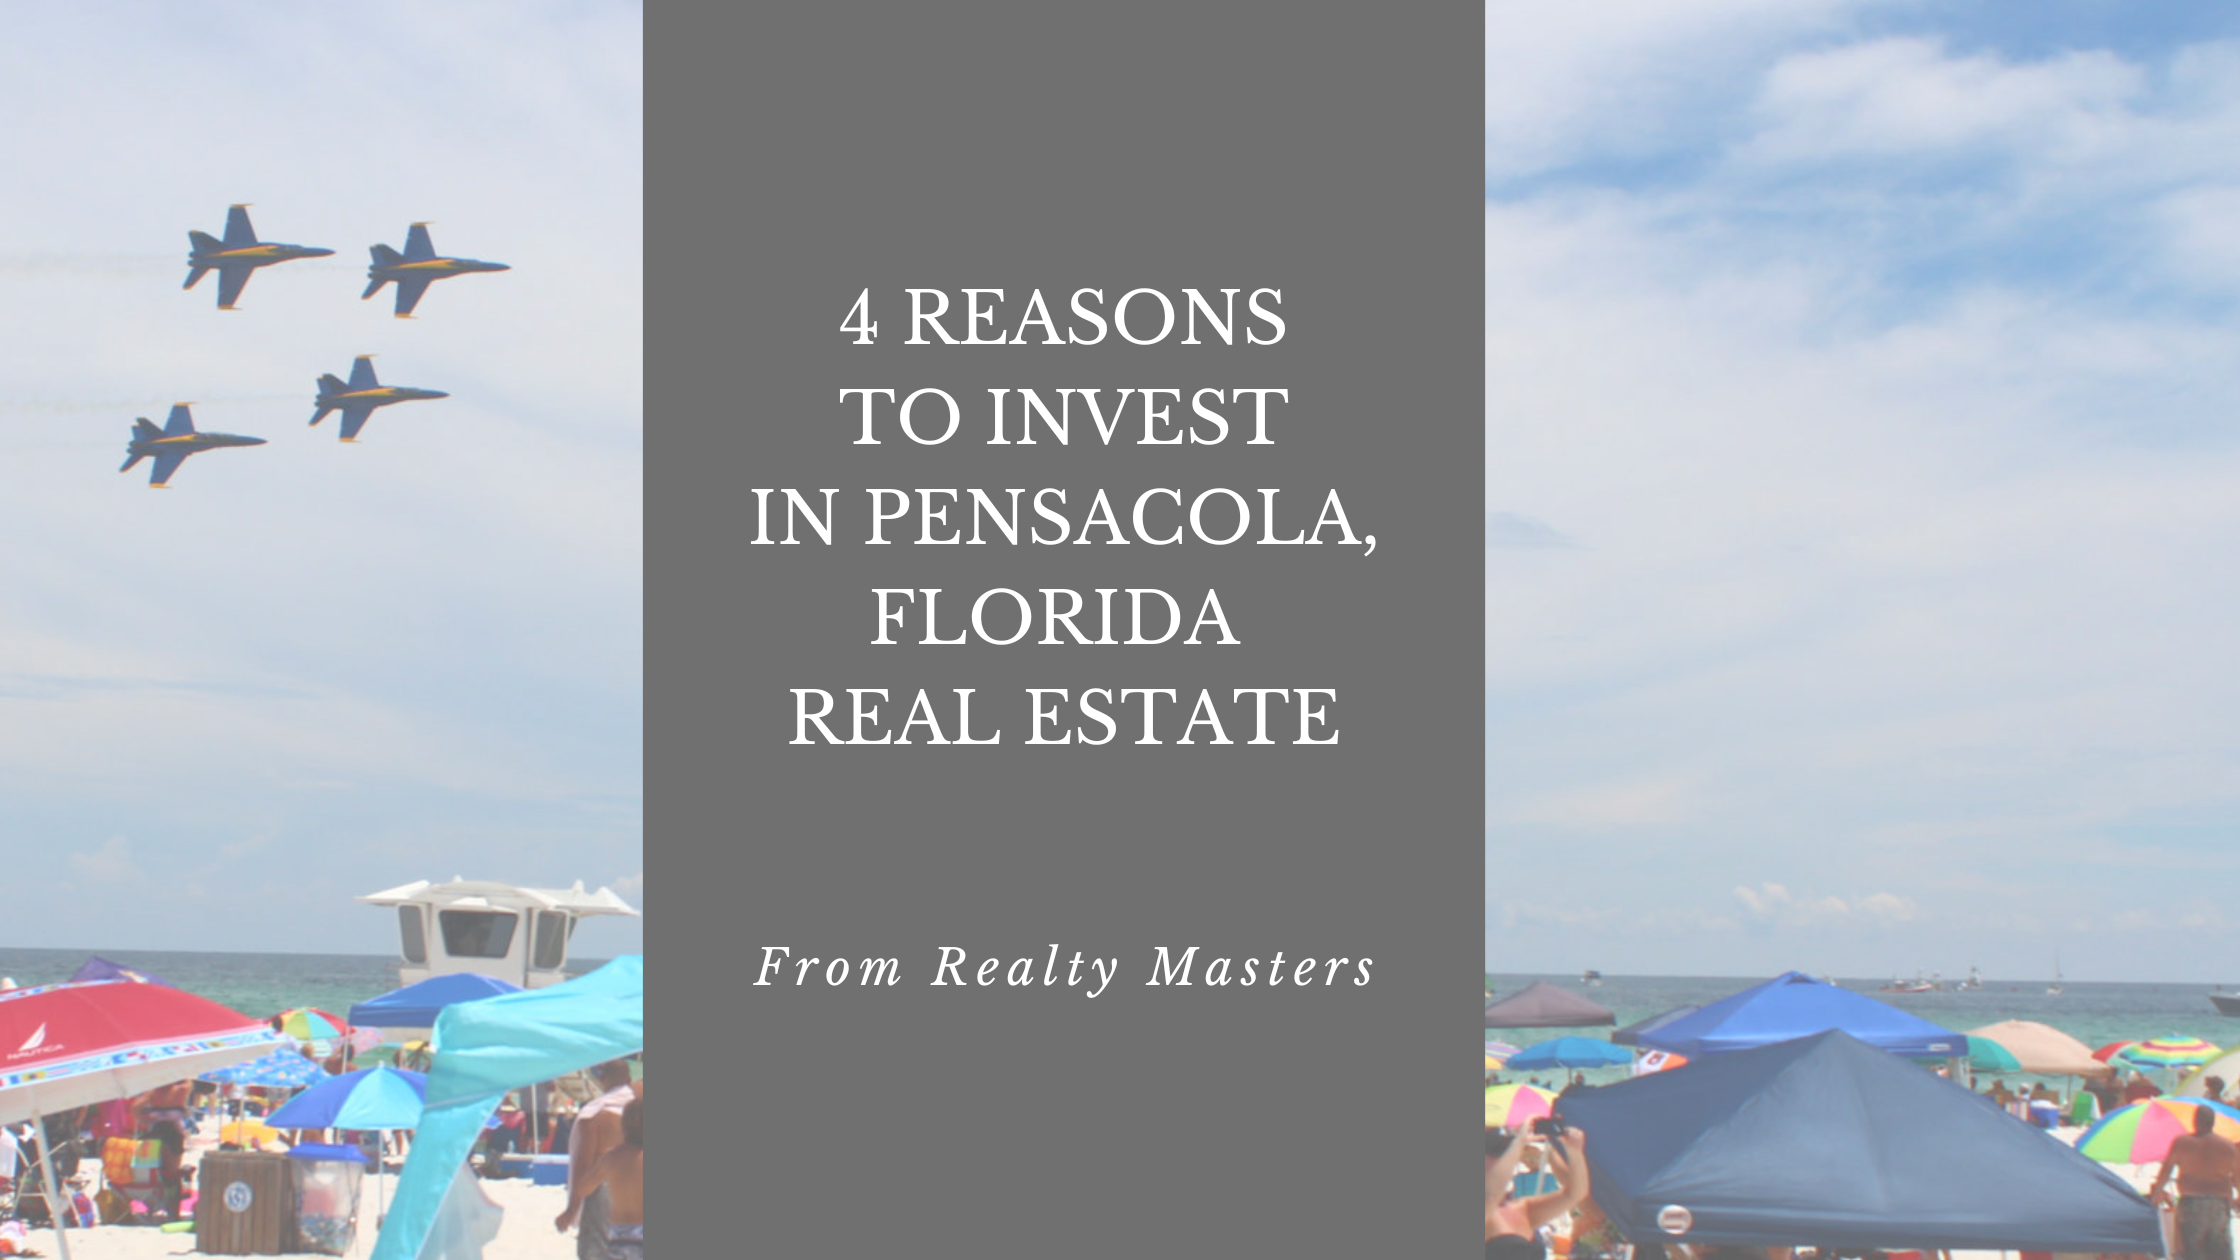 4 Reasons to Invest in Pensacola, FL Real Estate